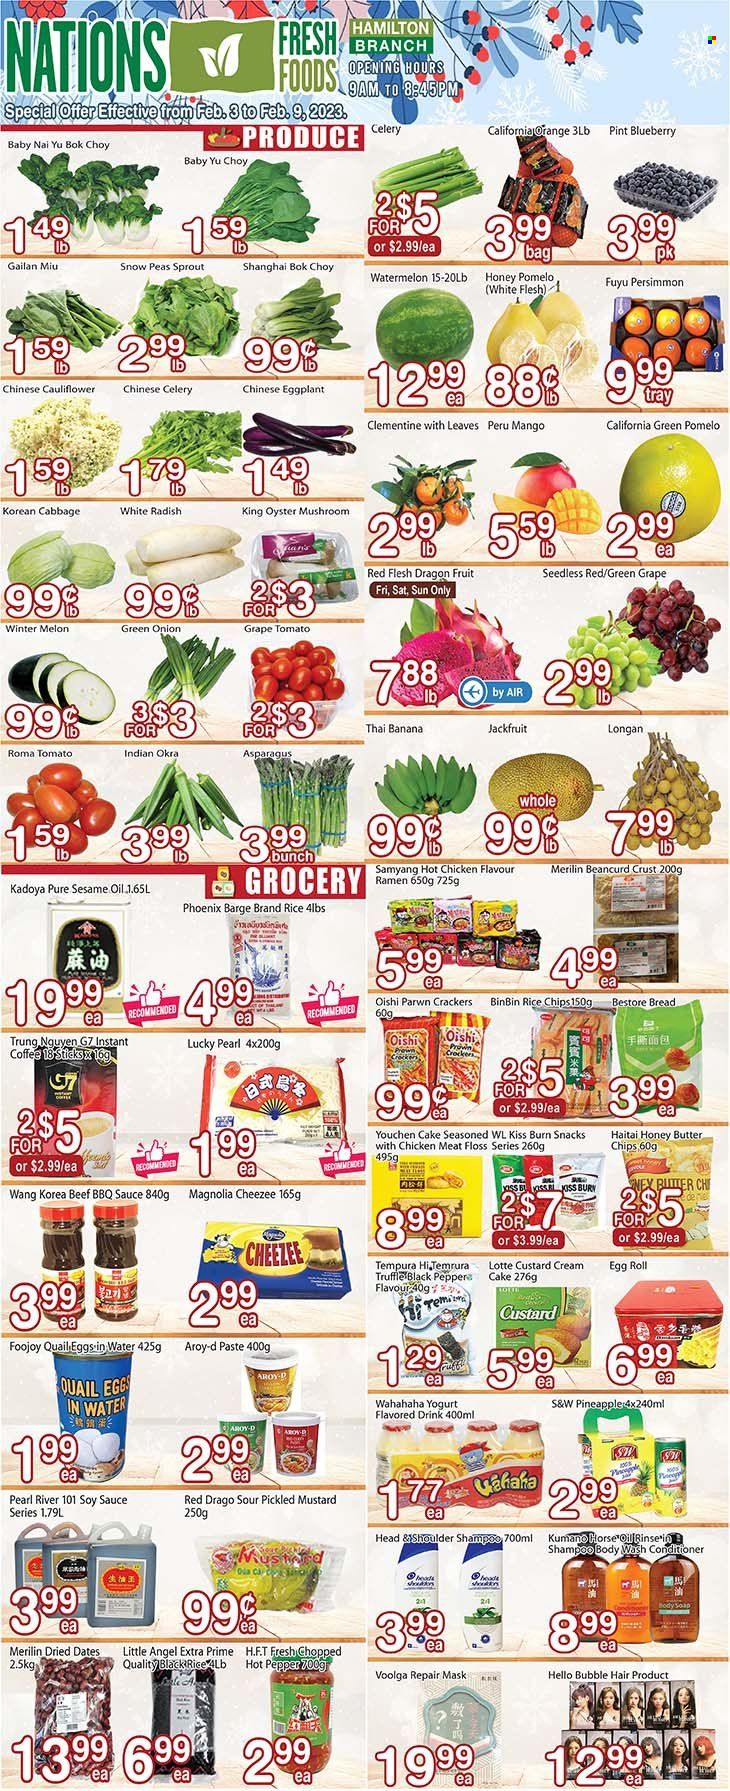 thumbnail - Nations Fresh Foods Flyer - February 03, 2023 - February 09, 2023 - Sales products - oyster mushrooms, mushrooms, bread, cake, asparagus, bok choy, cabbage, celery, radishes, tomatoes, peas, okra, onion, peppers, eggplant, white radish, green onion, mango, watermelon, pineapple, persimmons, oranges, melons, pomelo, dragon fruit, oysters, ramen, sauce, egg rolls, custard, yoghurt, Ola, snow peas, truffles, crackers, chips, BBQ sauce, mustard, soy sauce, sesame oil, honey, dried dates, coffee, instant coffee, quail, chicken, body wash, soap, conditioner, shampoo. Page 1.